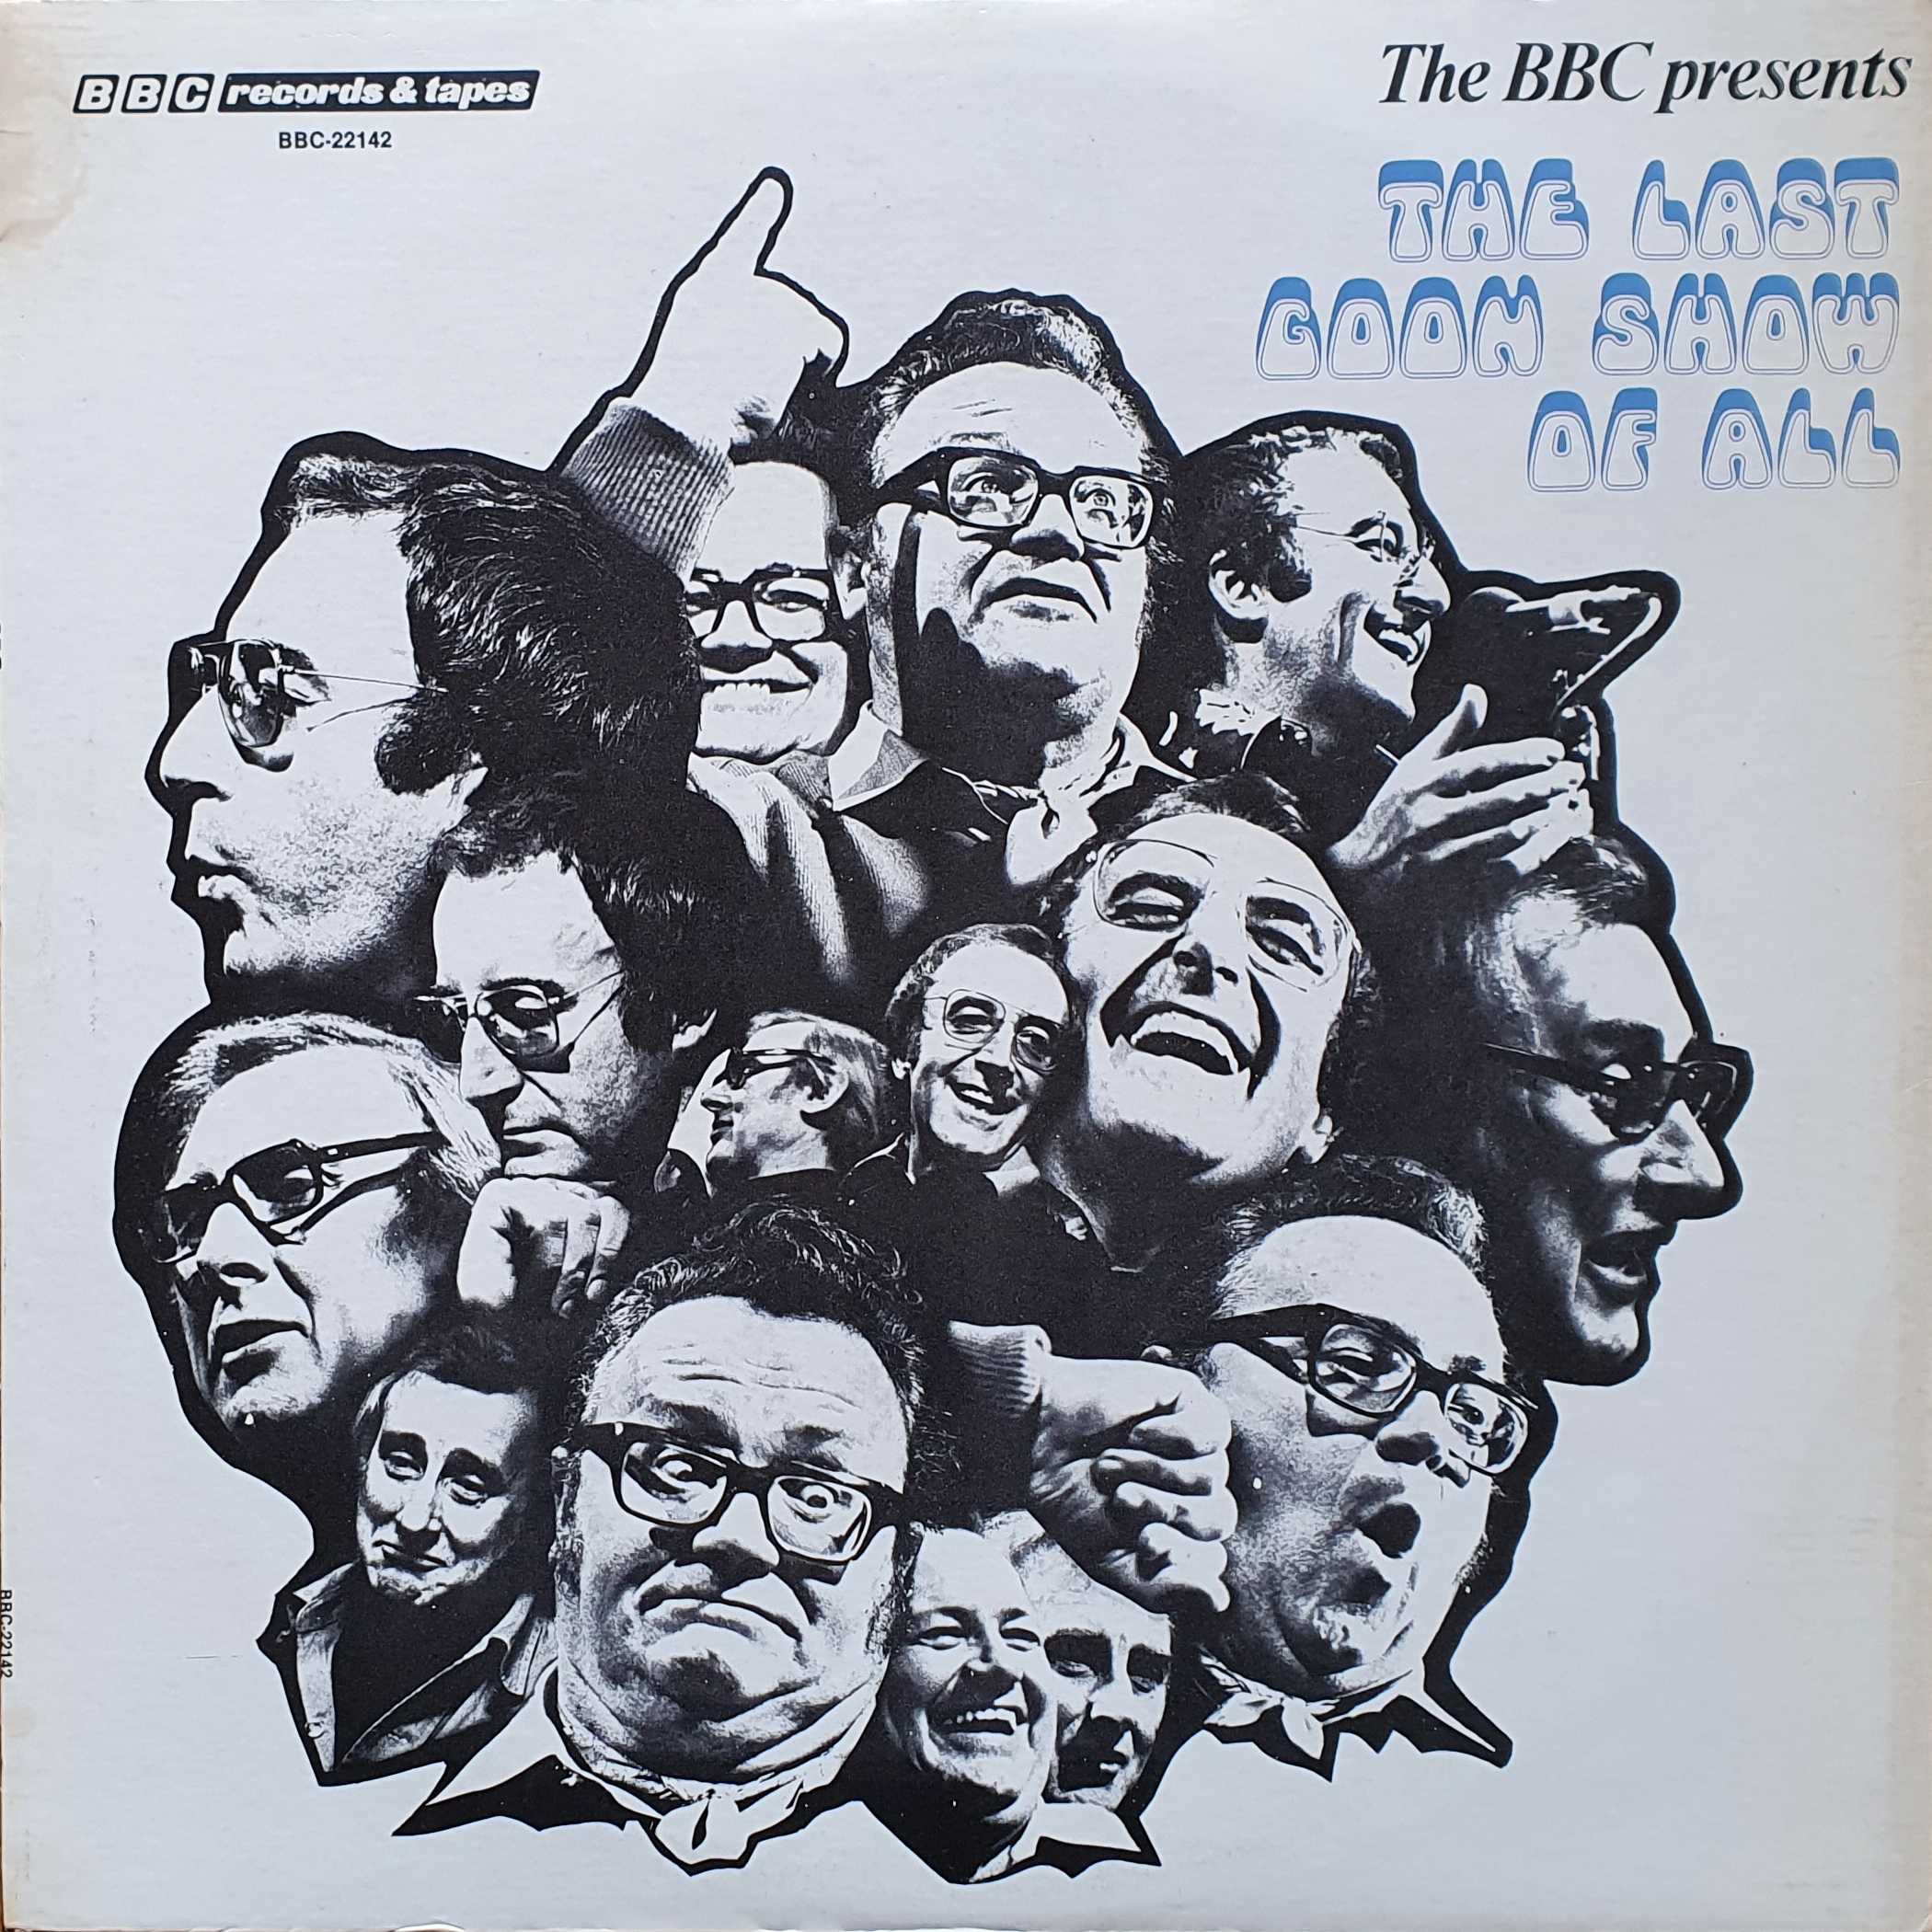 Picture of BBC - 22142 The last Goon show of all by artist Spike Milligan from the BBC albums - Records and Tapes library